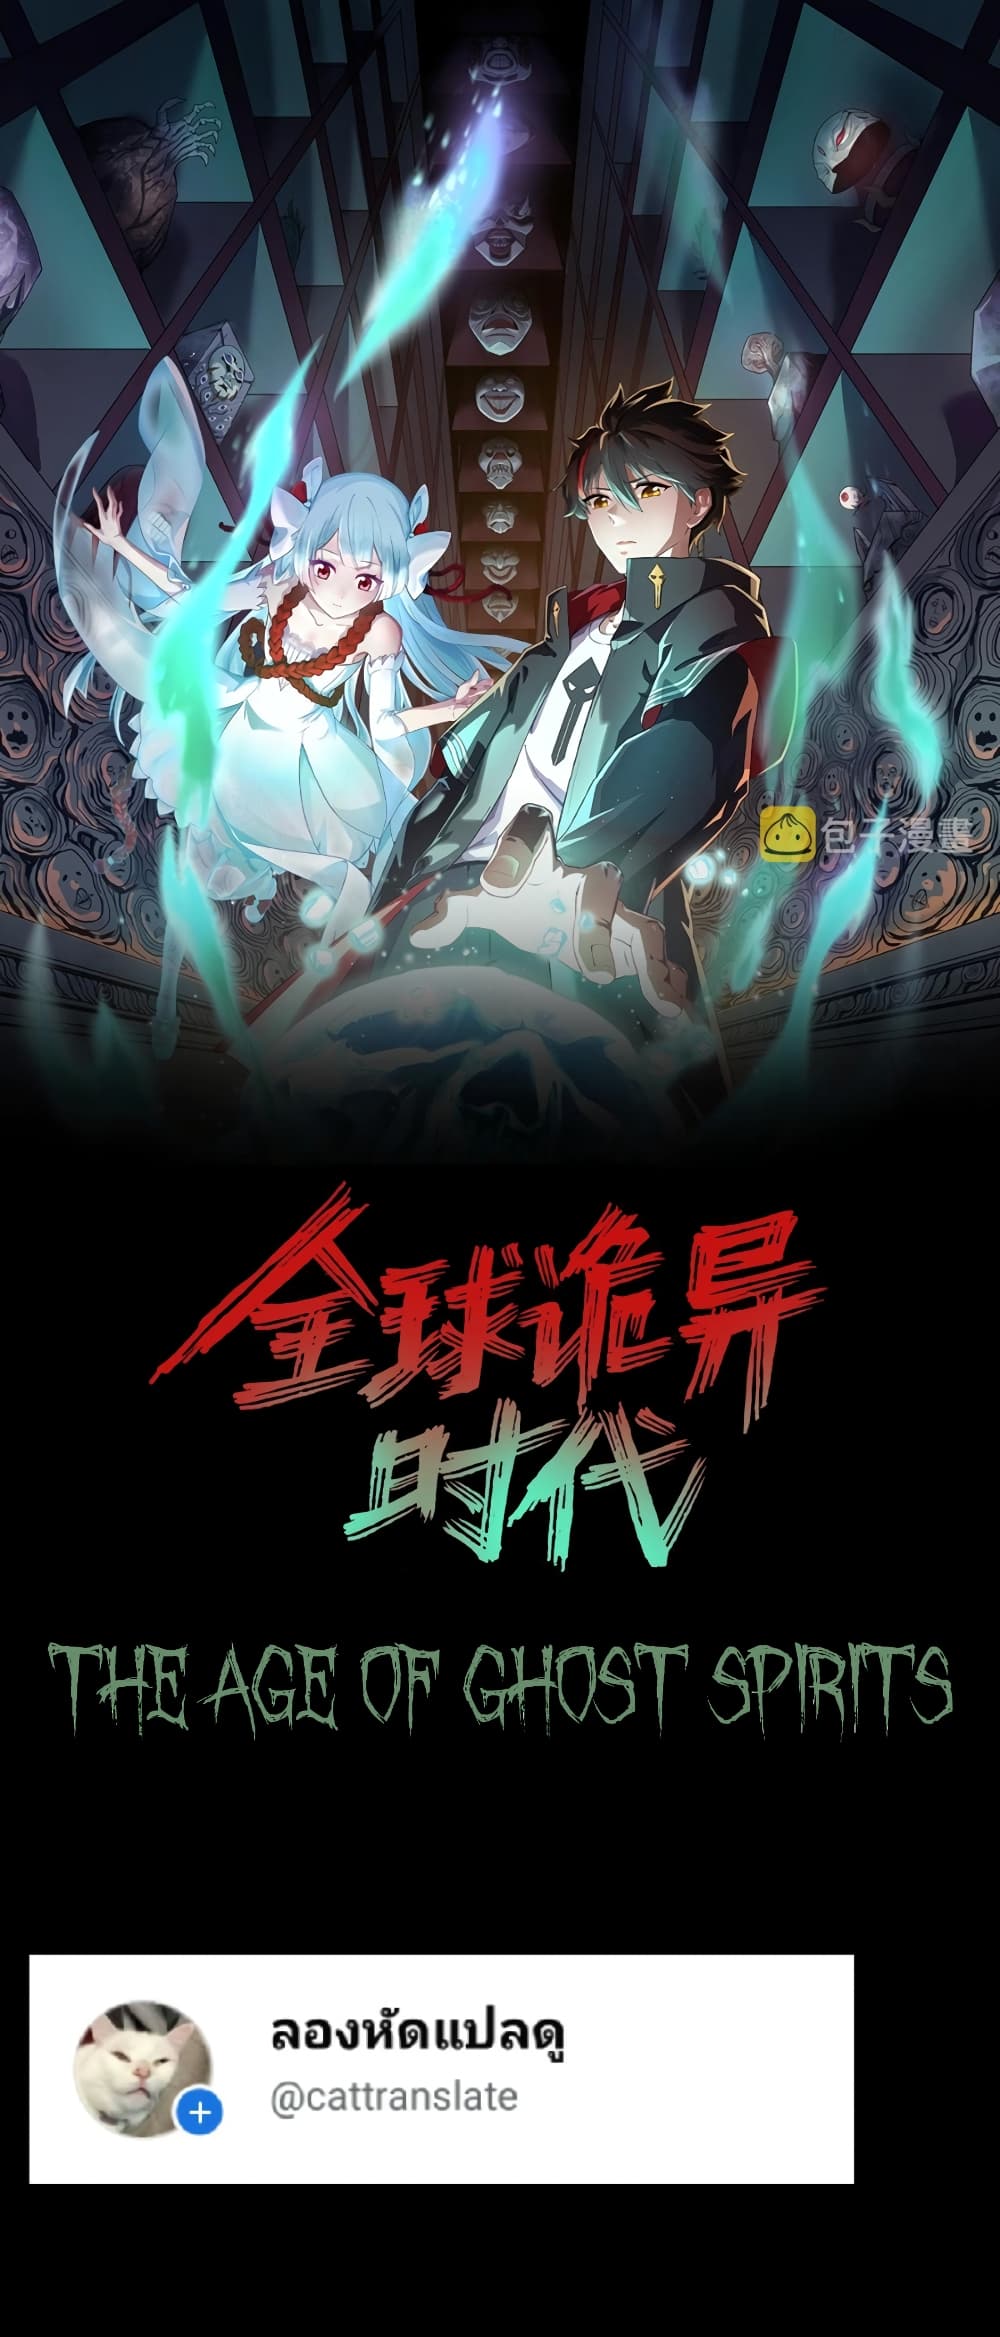 The Age of Ghost Spirits à¸à¸­à¸à¸à¸µà¹ 44 (1)